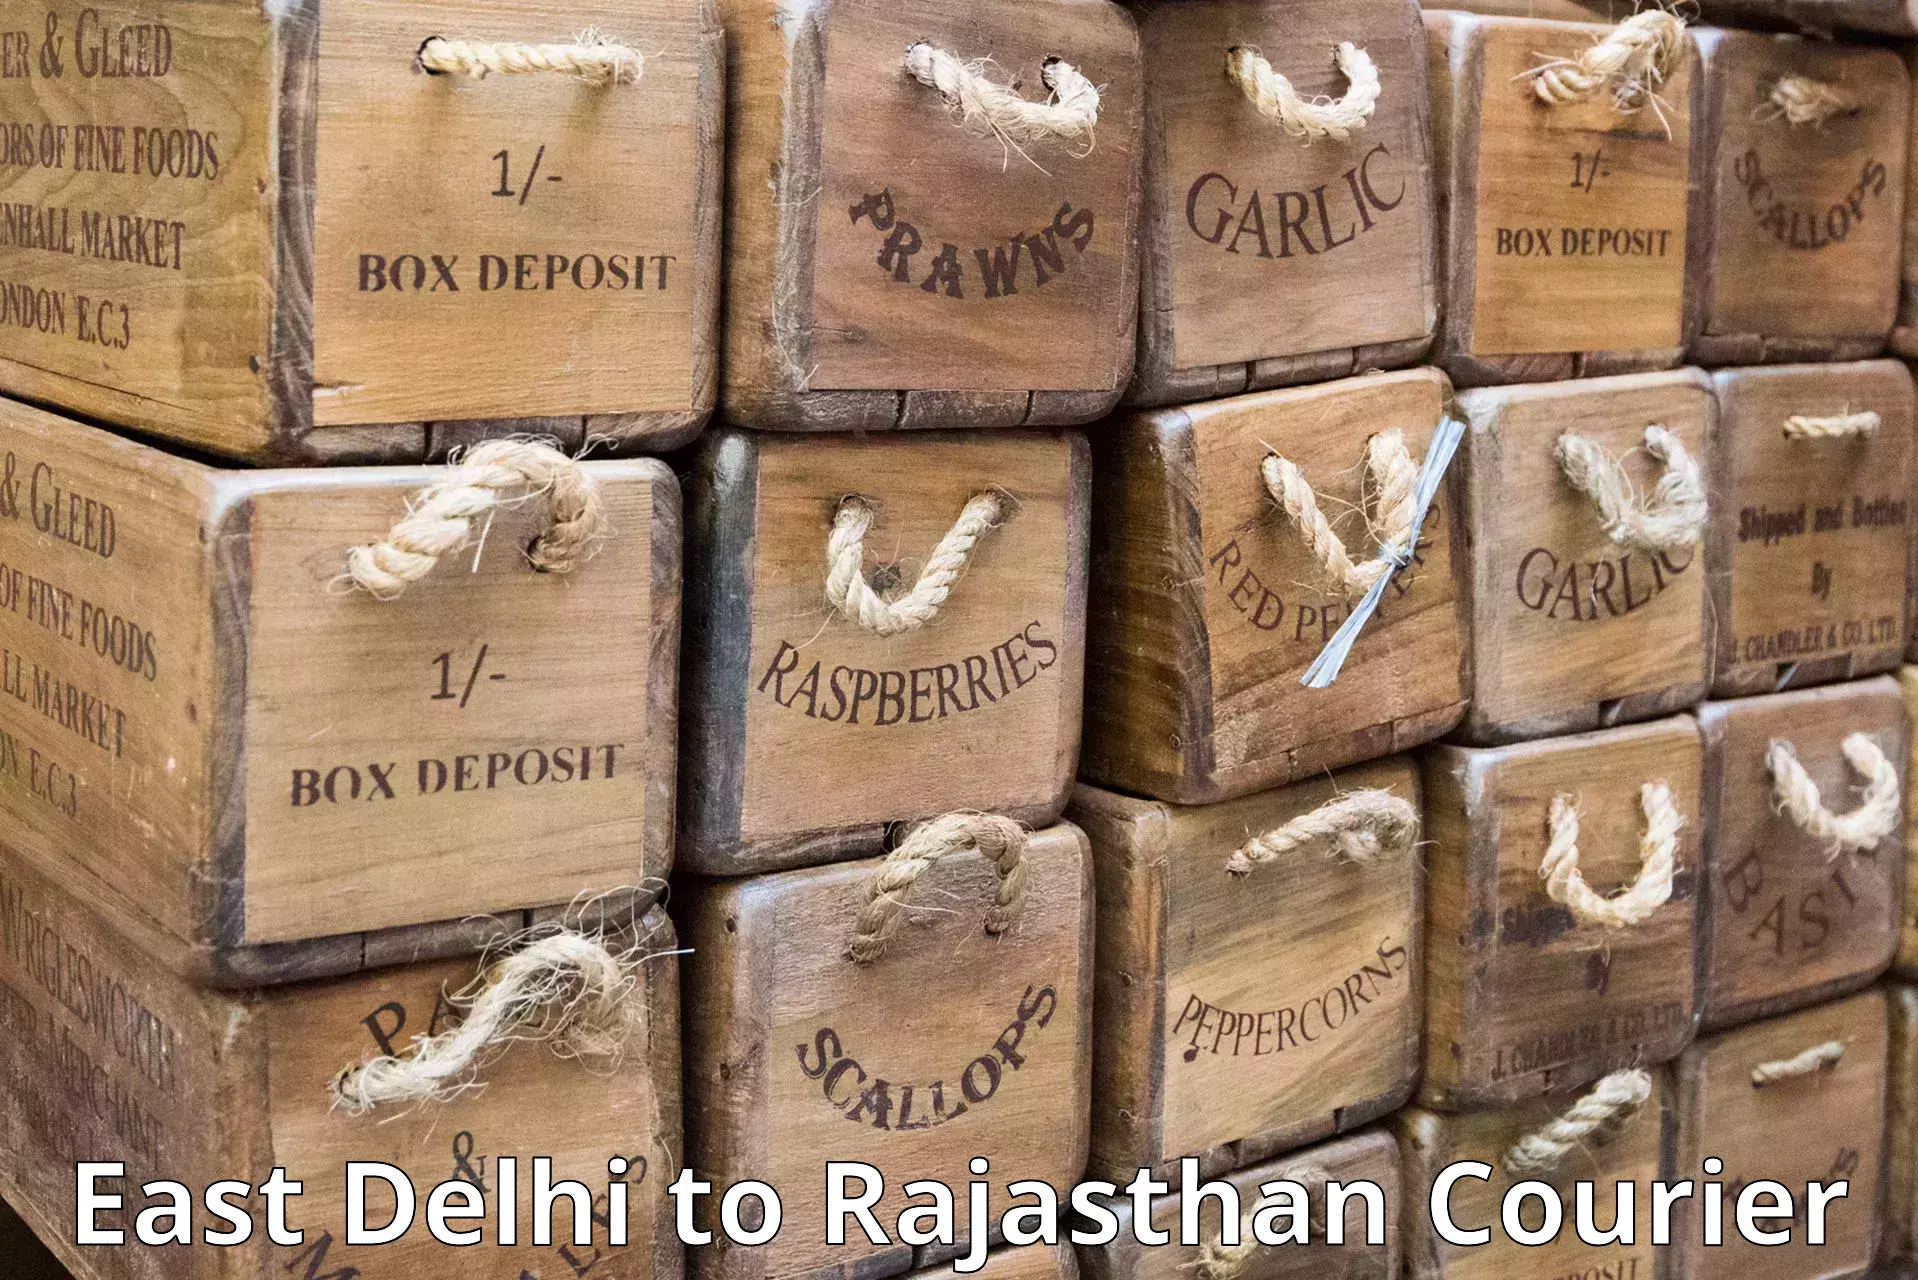 Courier service booking East Delhi to Degana